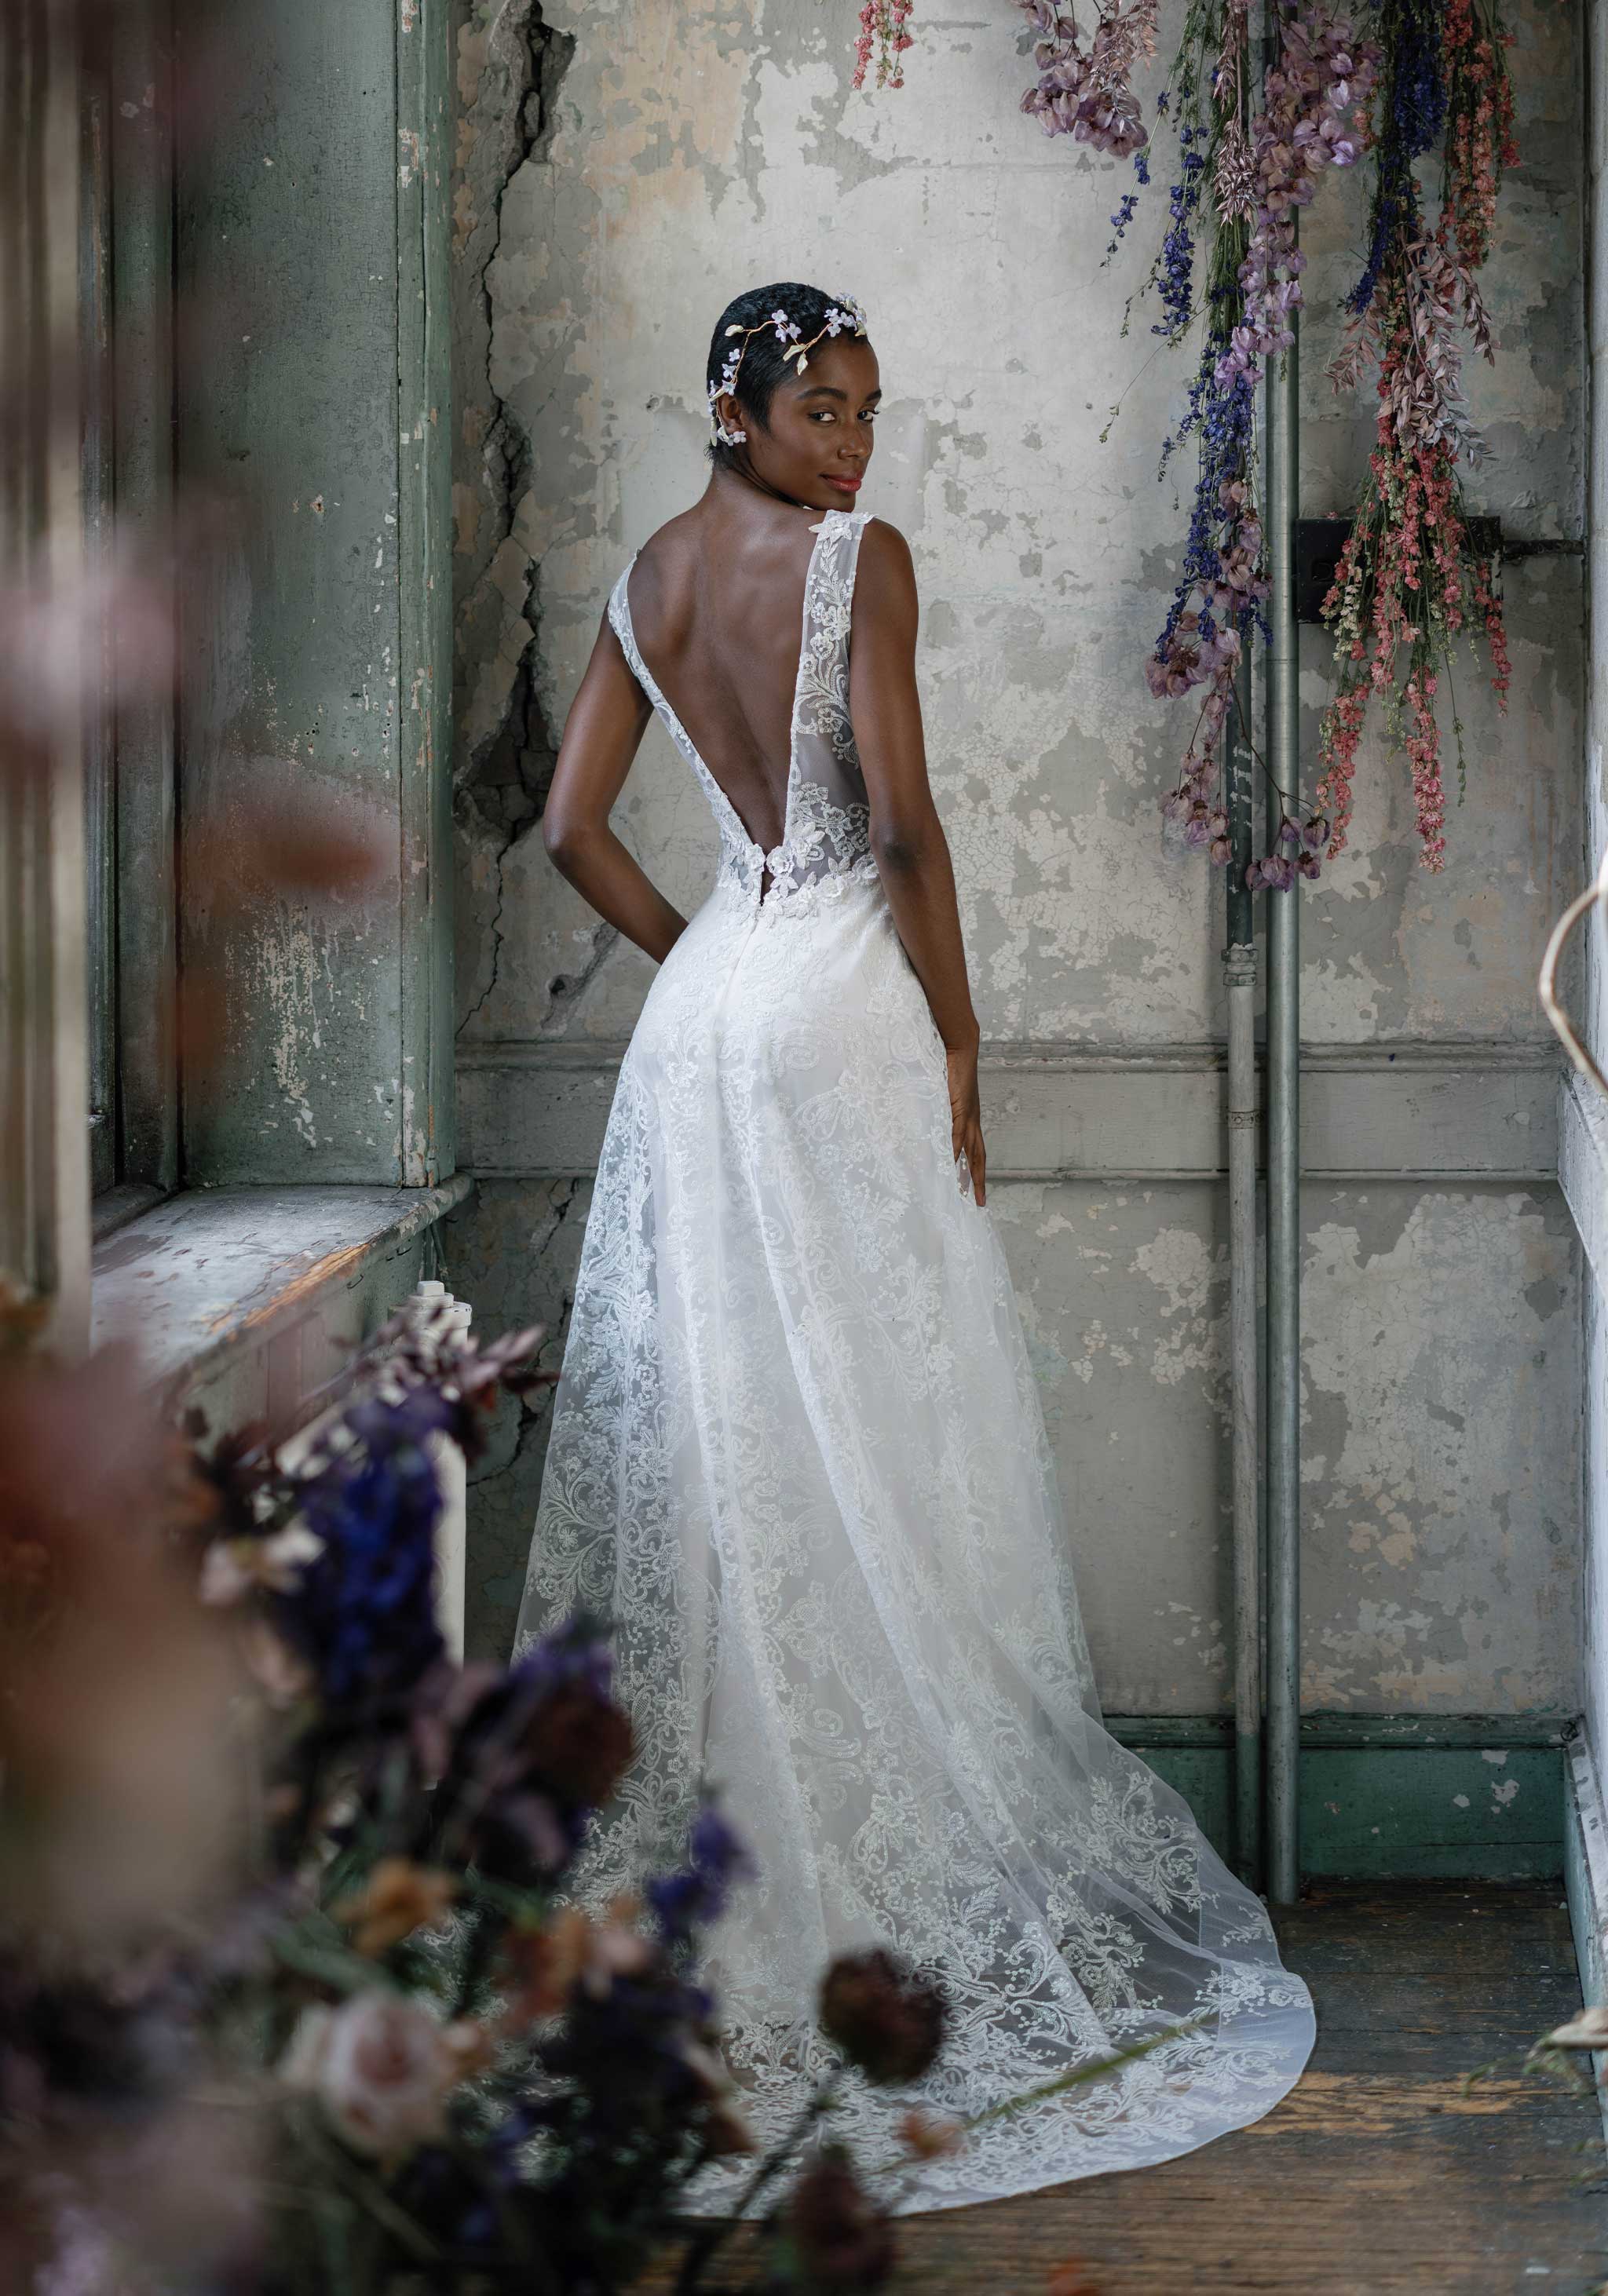 Crystal Wedding Dress with open plunging design by Claire Pettibone